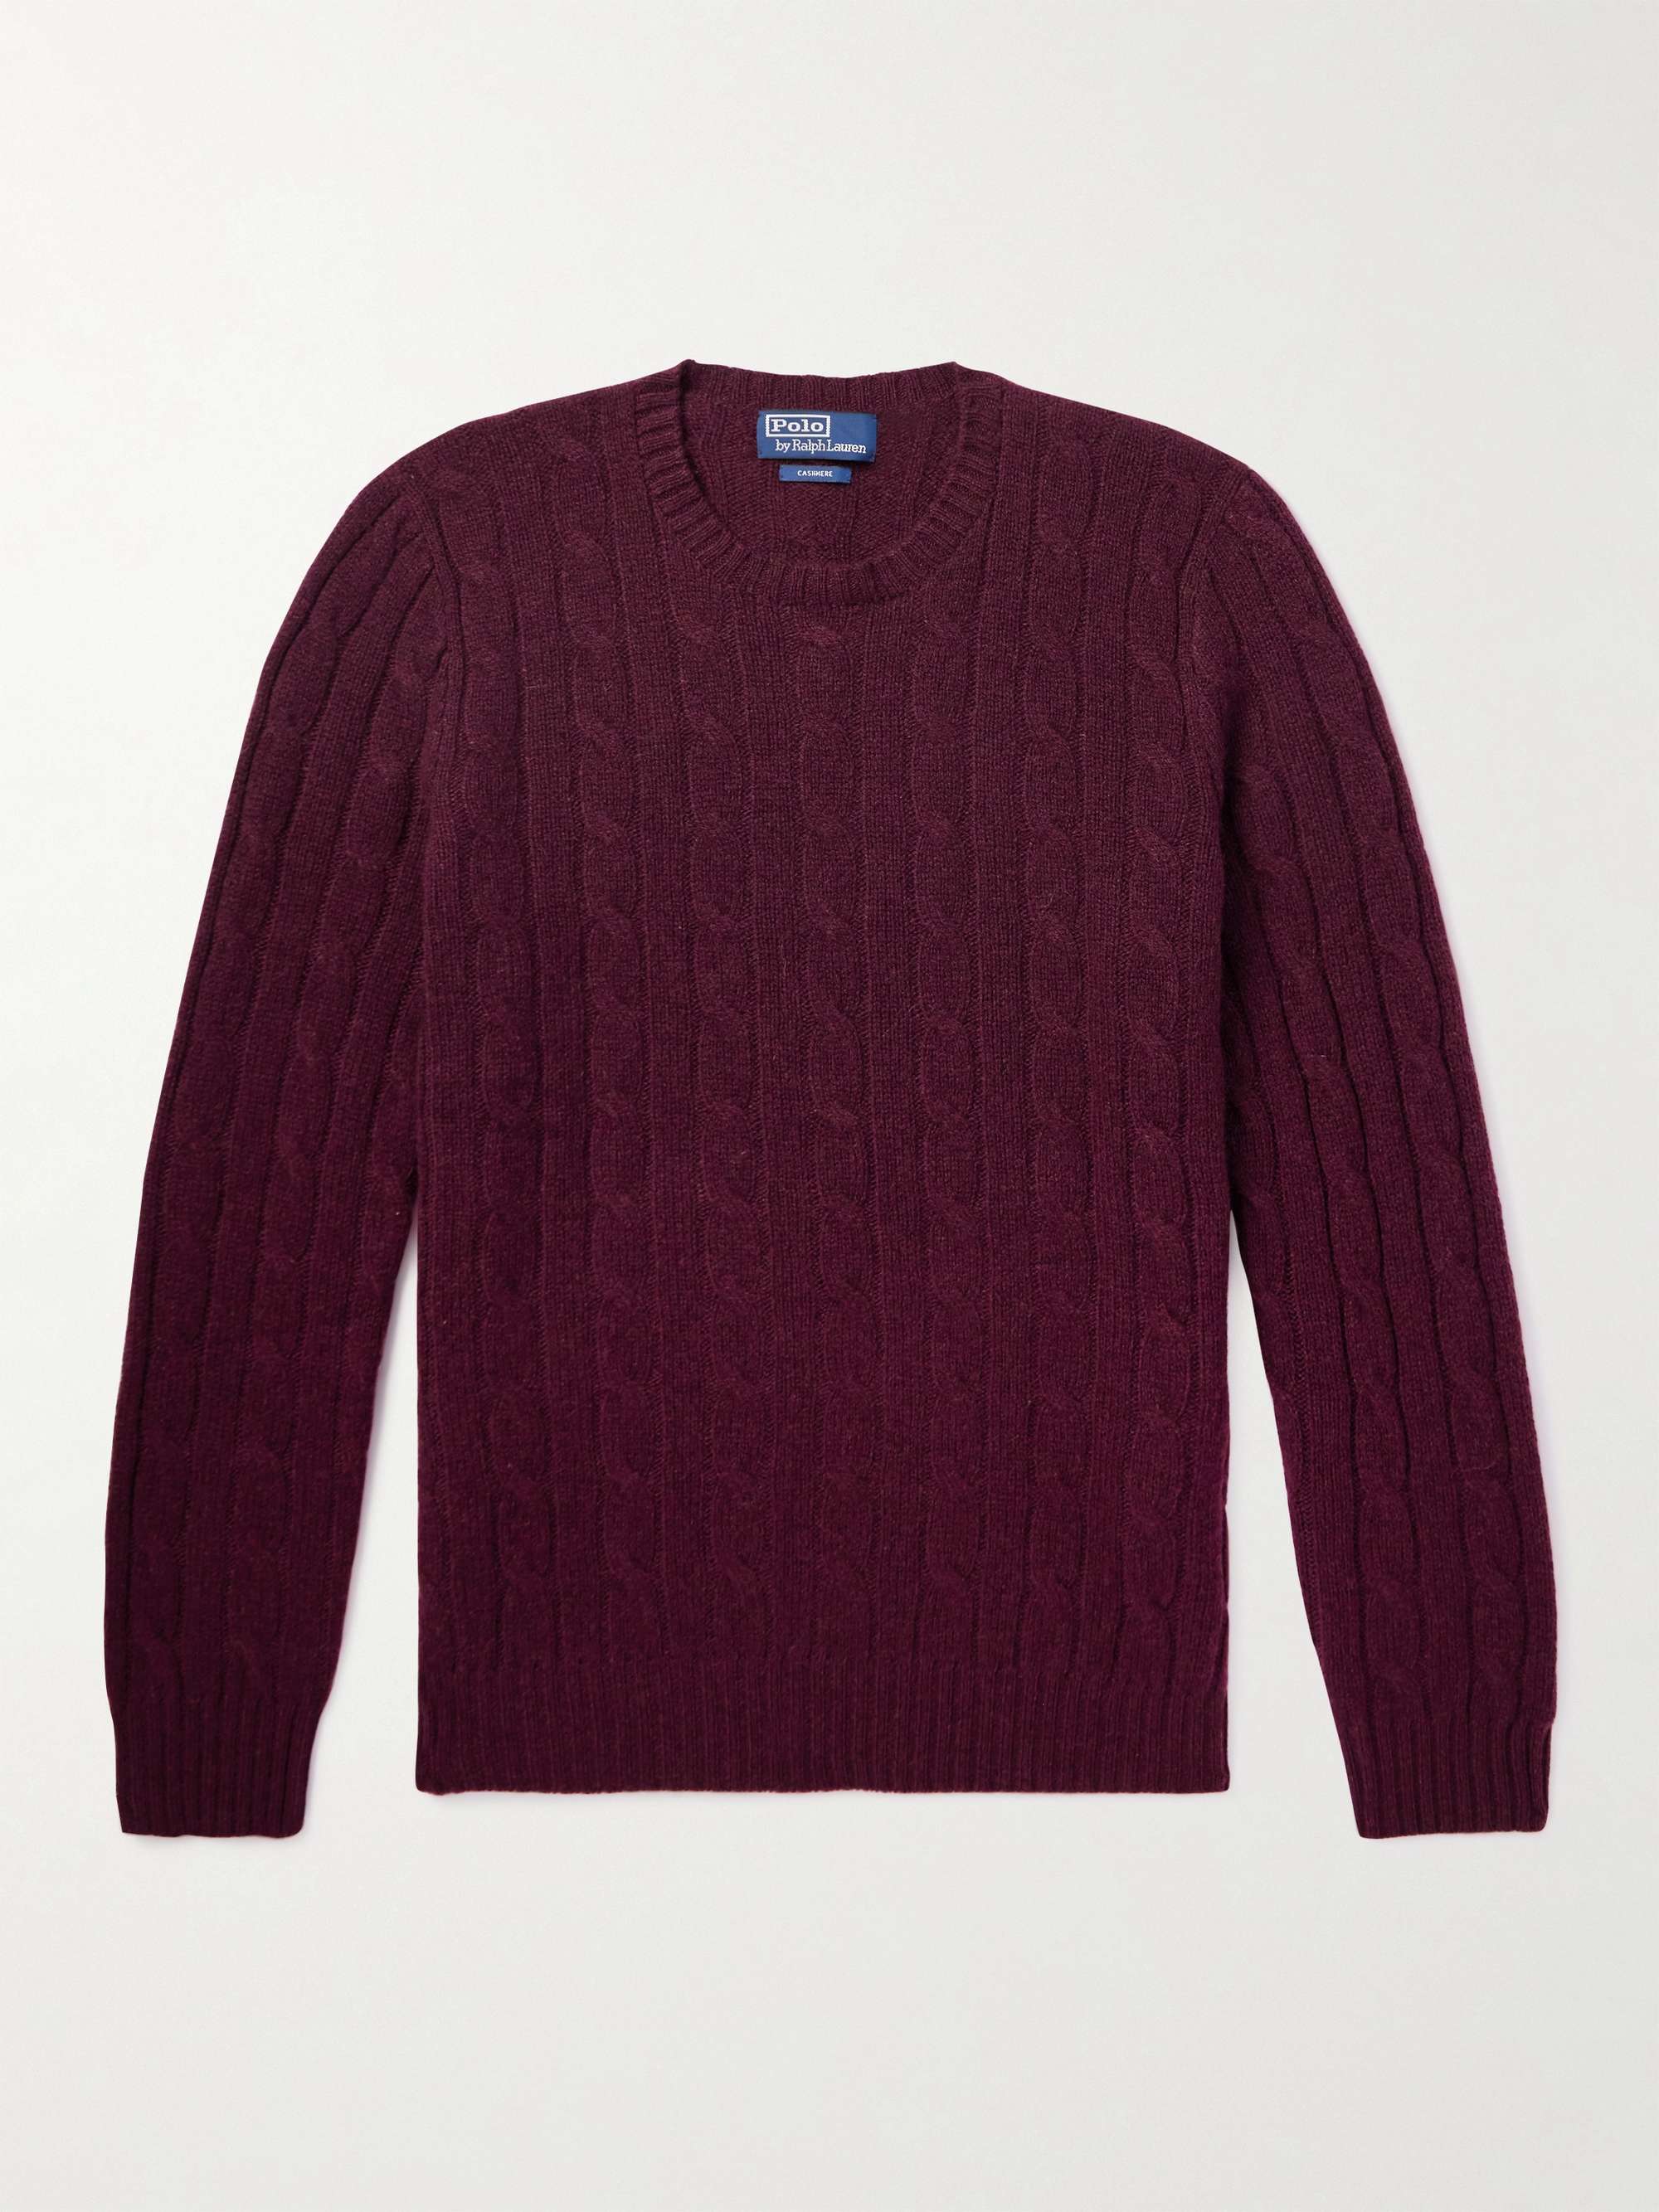 POLO RALPH LAUREN Logo-Embroidered Cable-Knit Cashmere Sweater,Burgundy